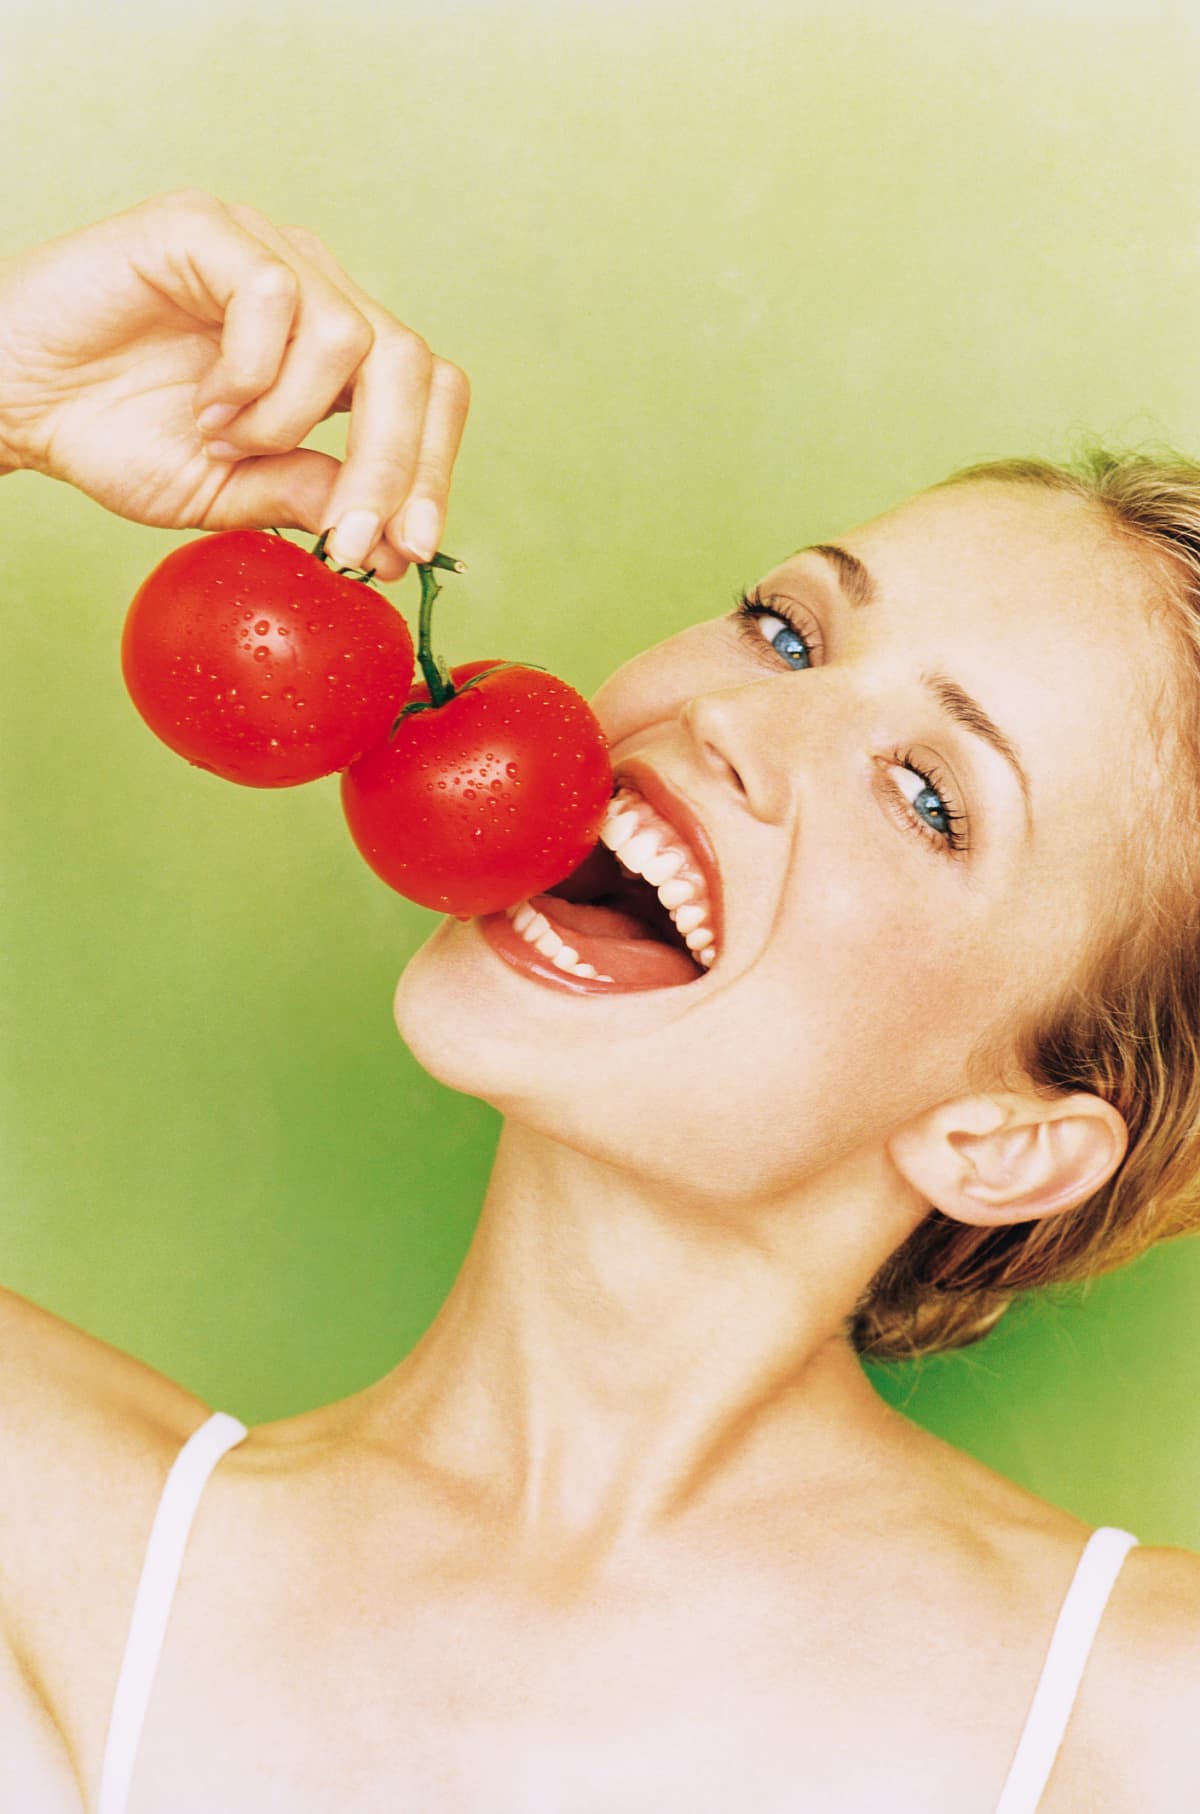 Young smiling woman holding tomatoes up to mouth